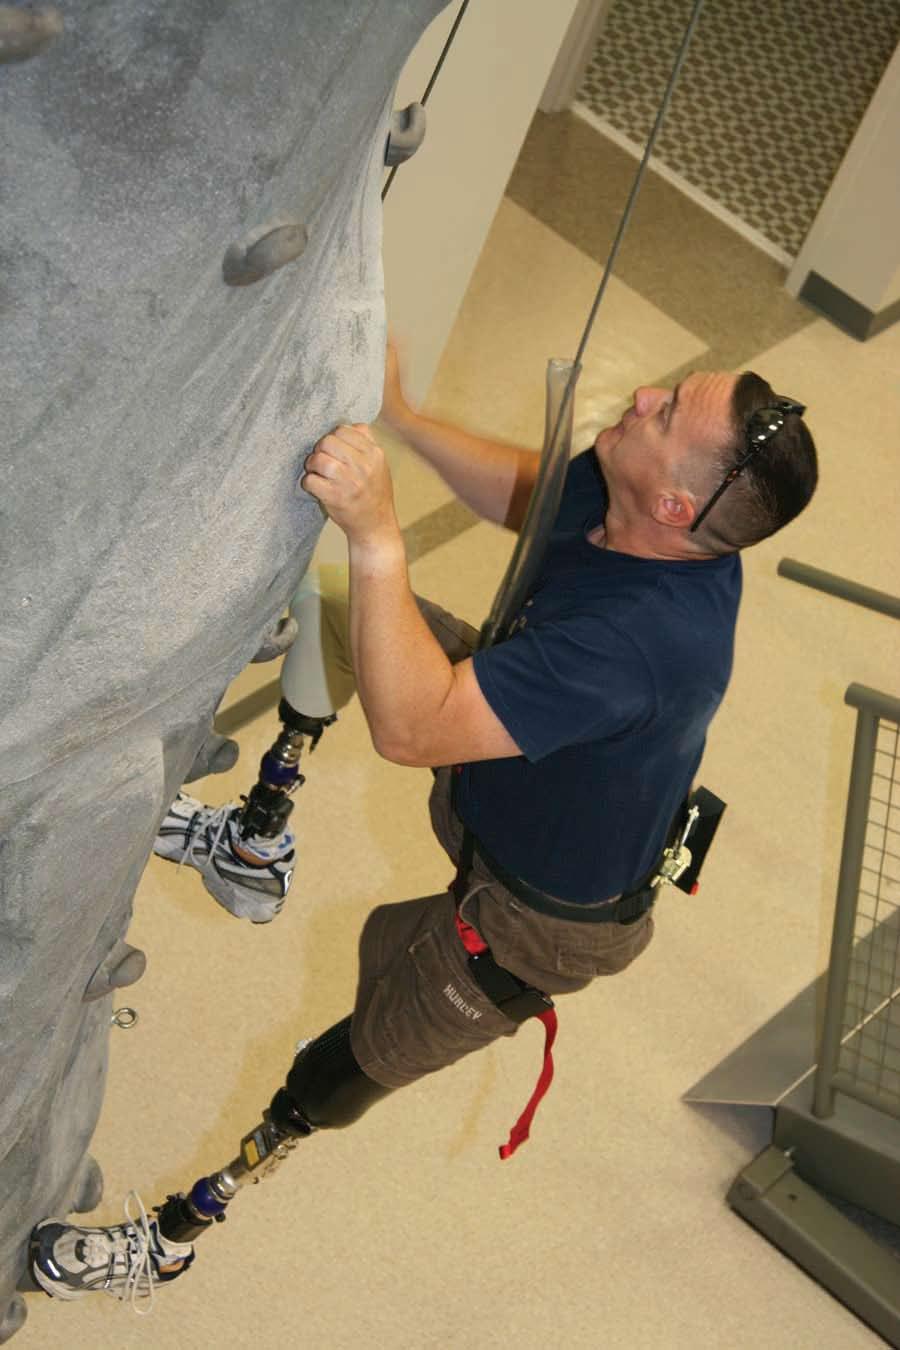 276 A soldier practices climbing skill on the rock wall located in the Military